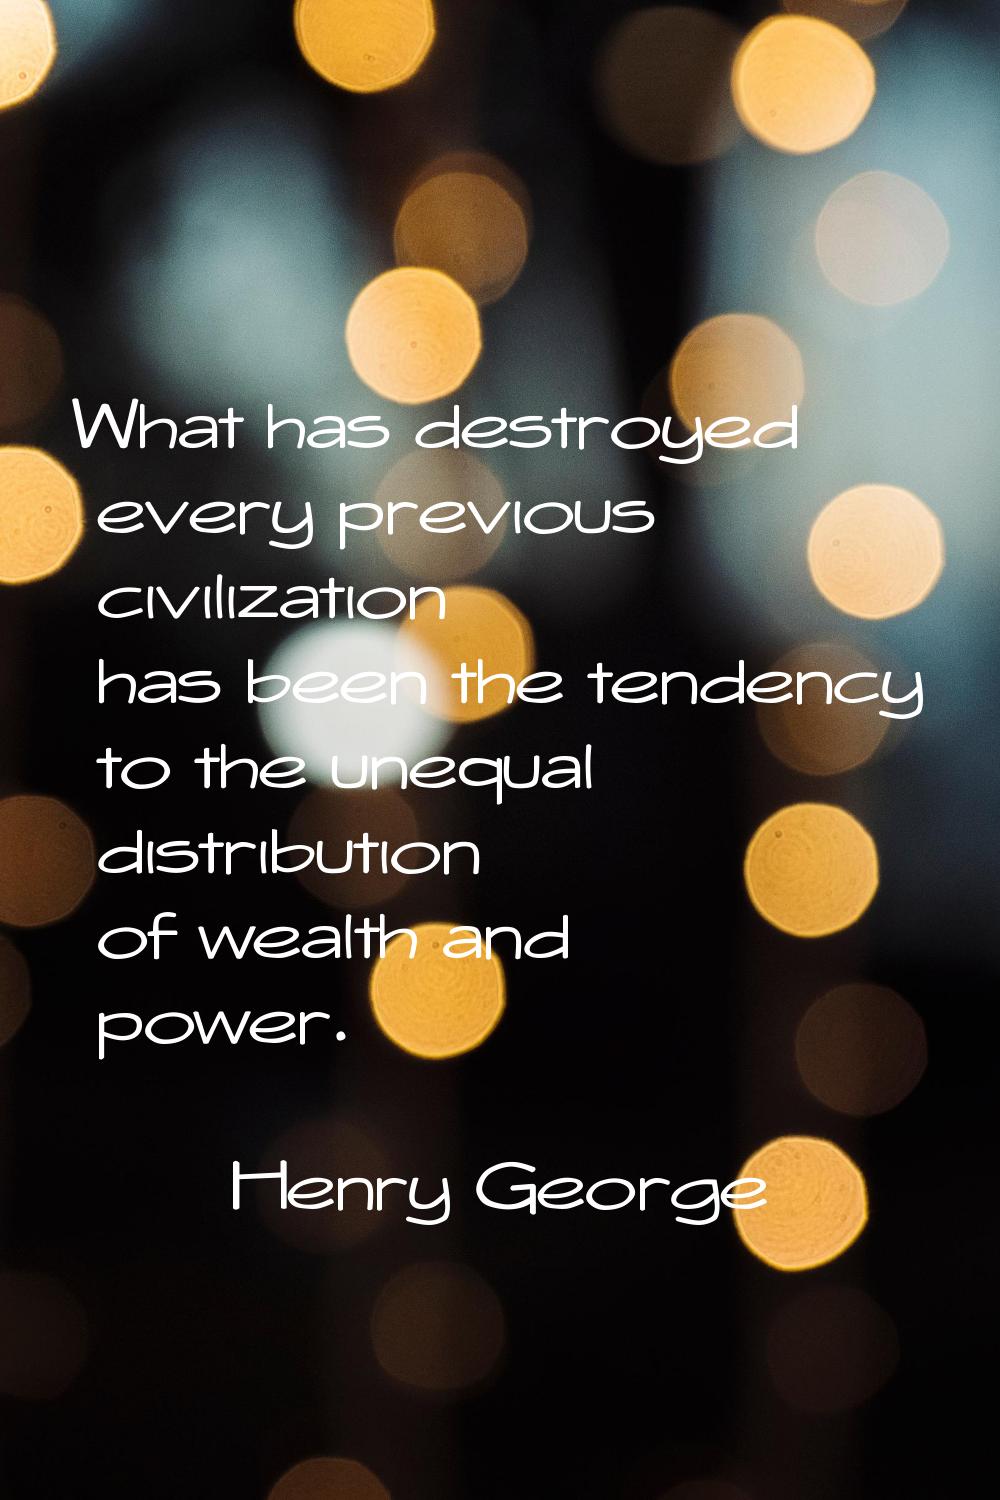 What has destroyed every previous civilization has been the tendency to the unequal distribution of